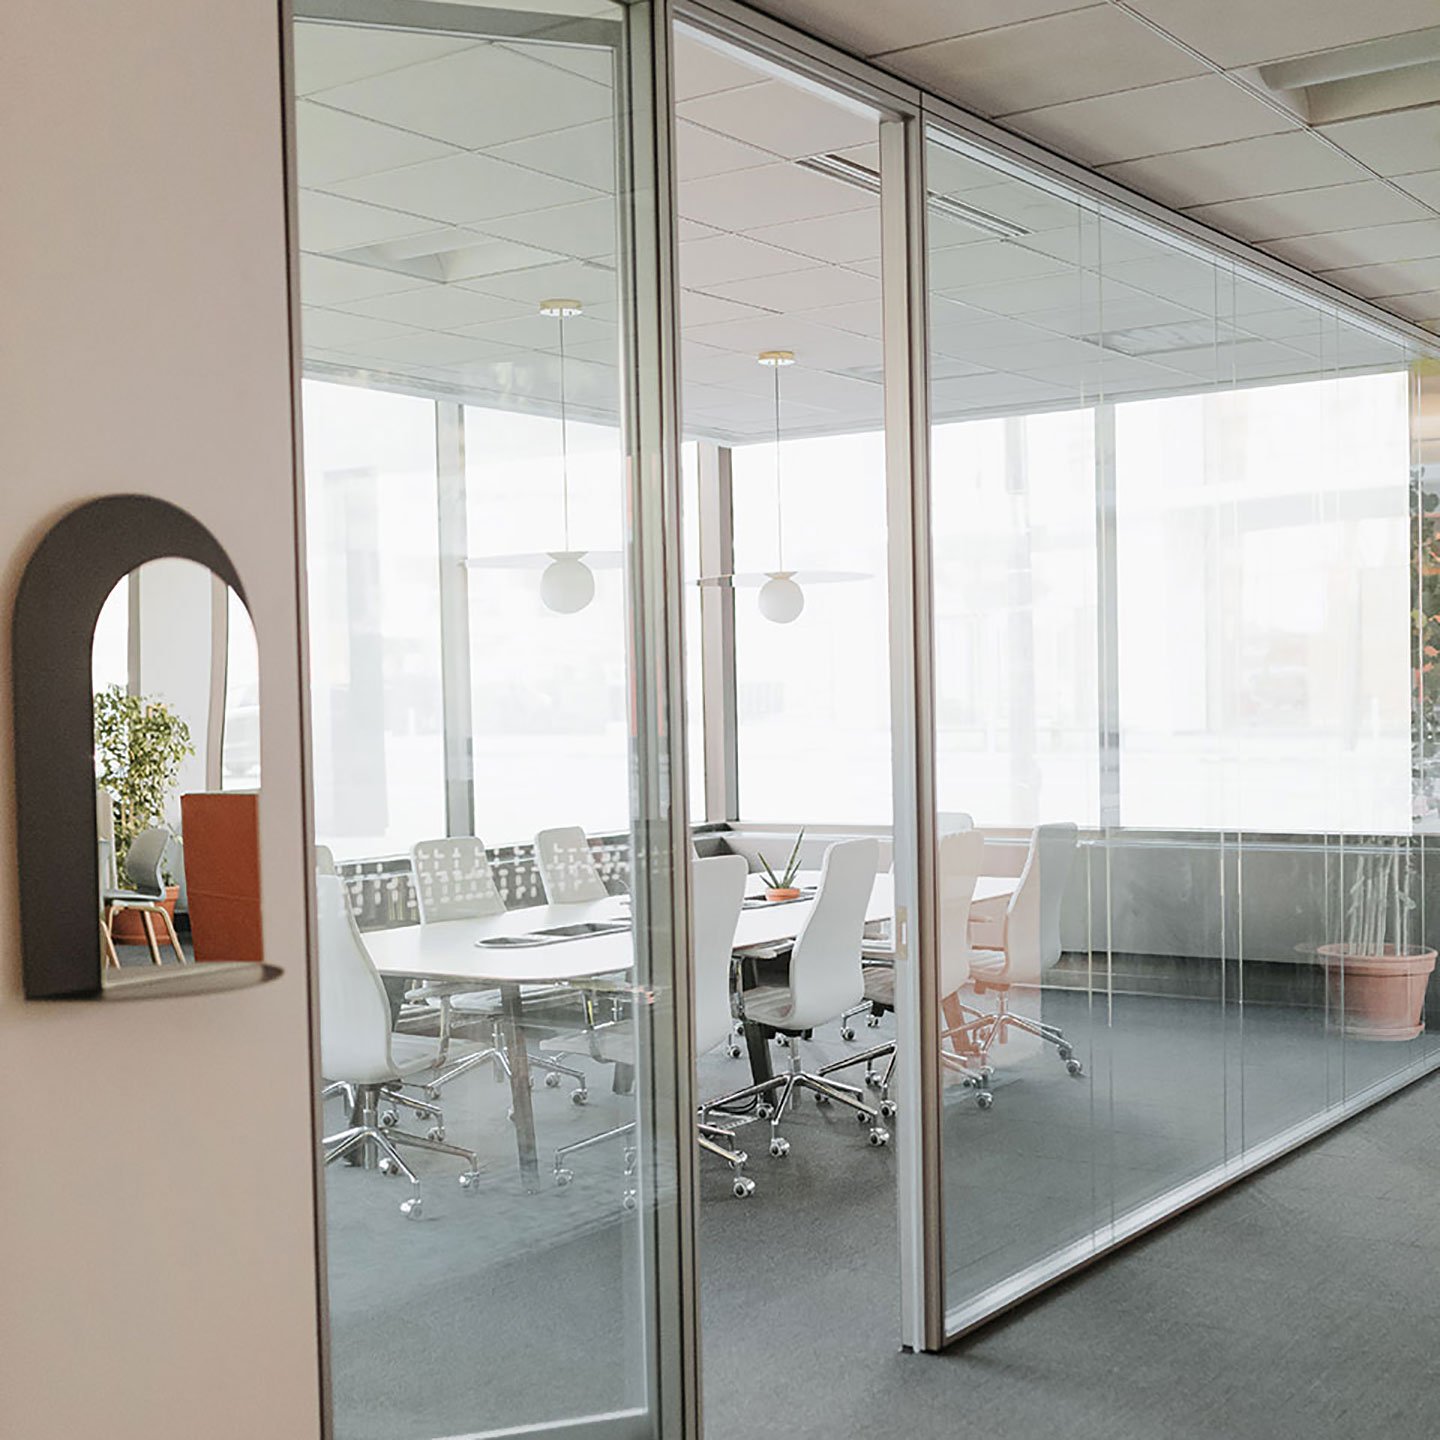 Haworth Enclose Frameless Glass 2 Wall for private meeting room with white desk and white chairs in office 